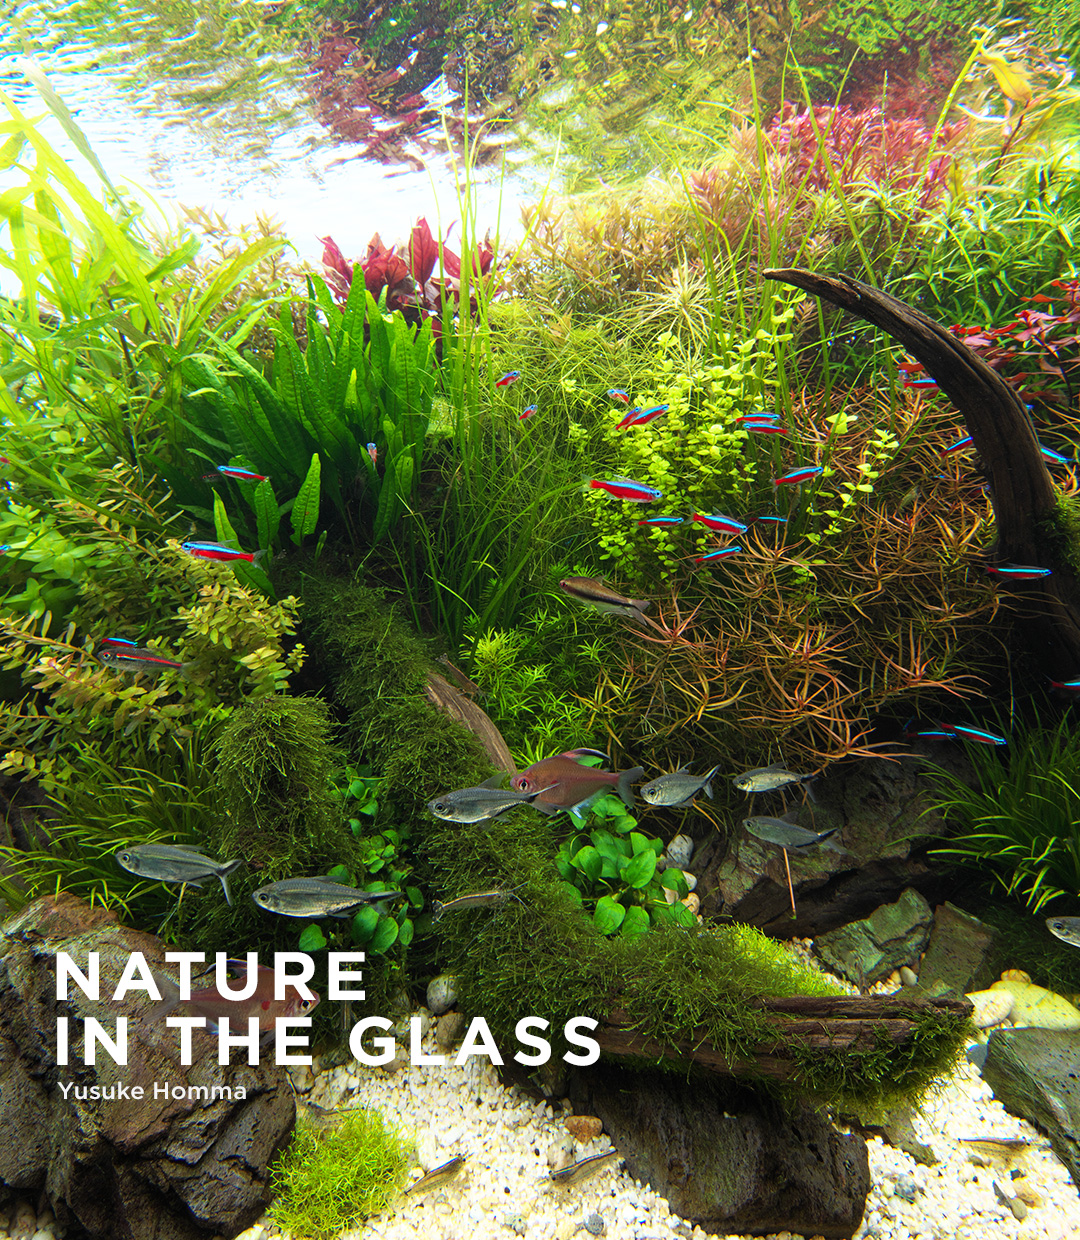 NATURE IN THE GLASS ‘Waterside Palette’